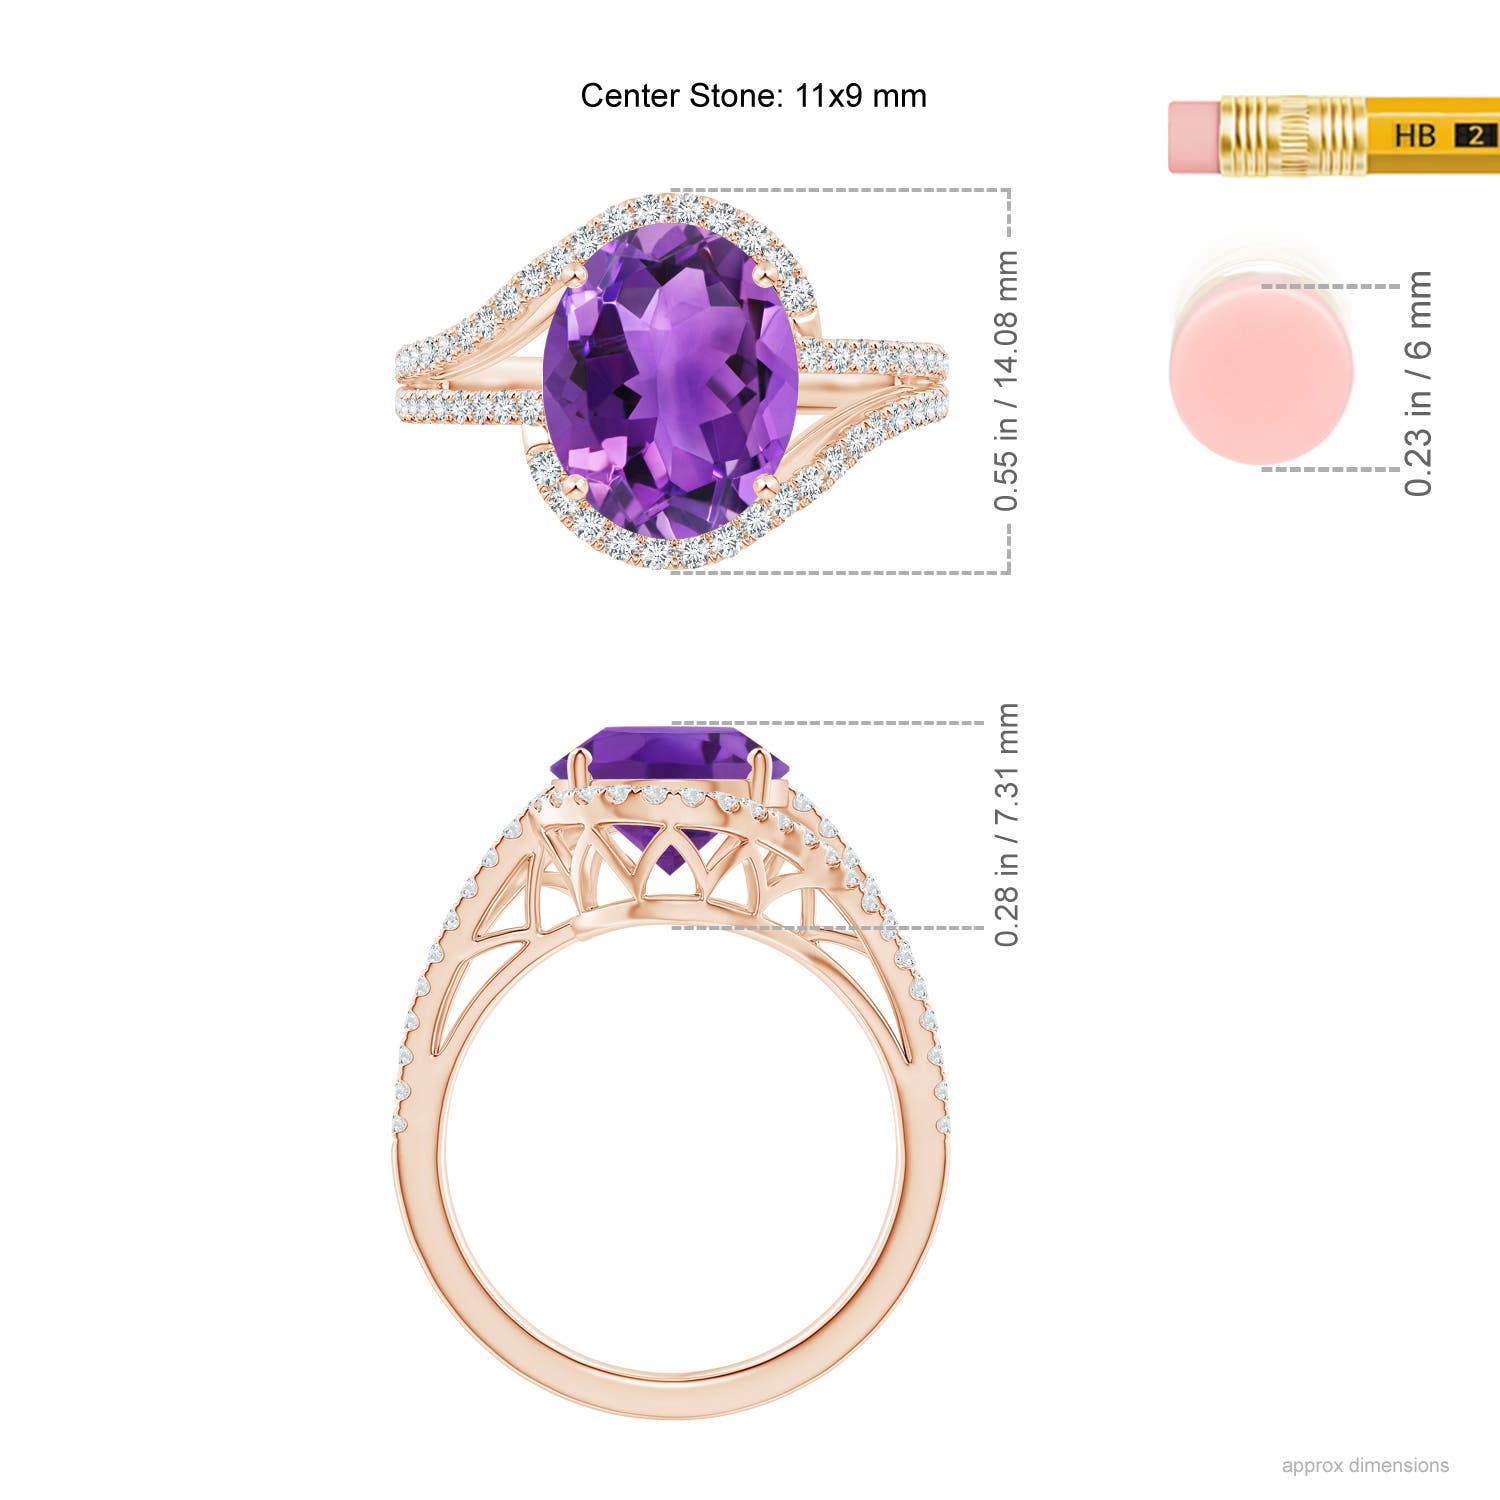 AAA - Amethyst / 3.65 CT / 14 KT Rose Gold